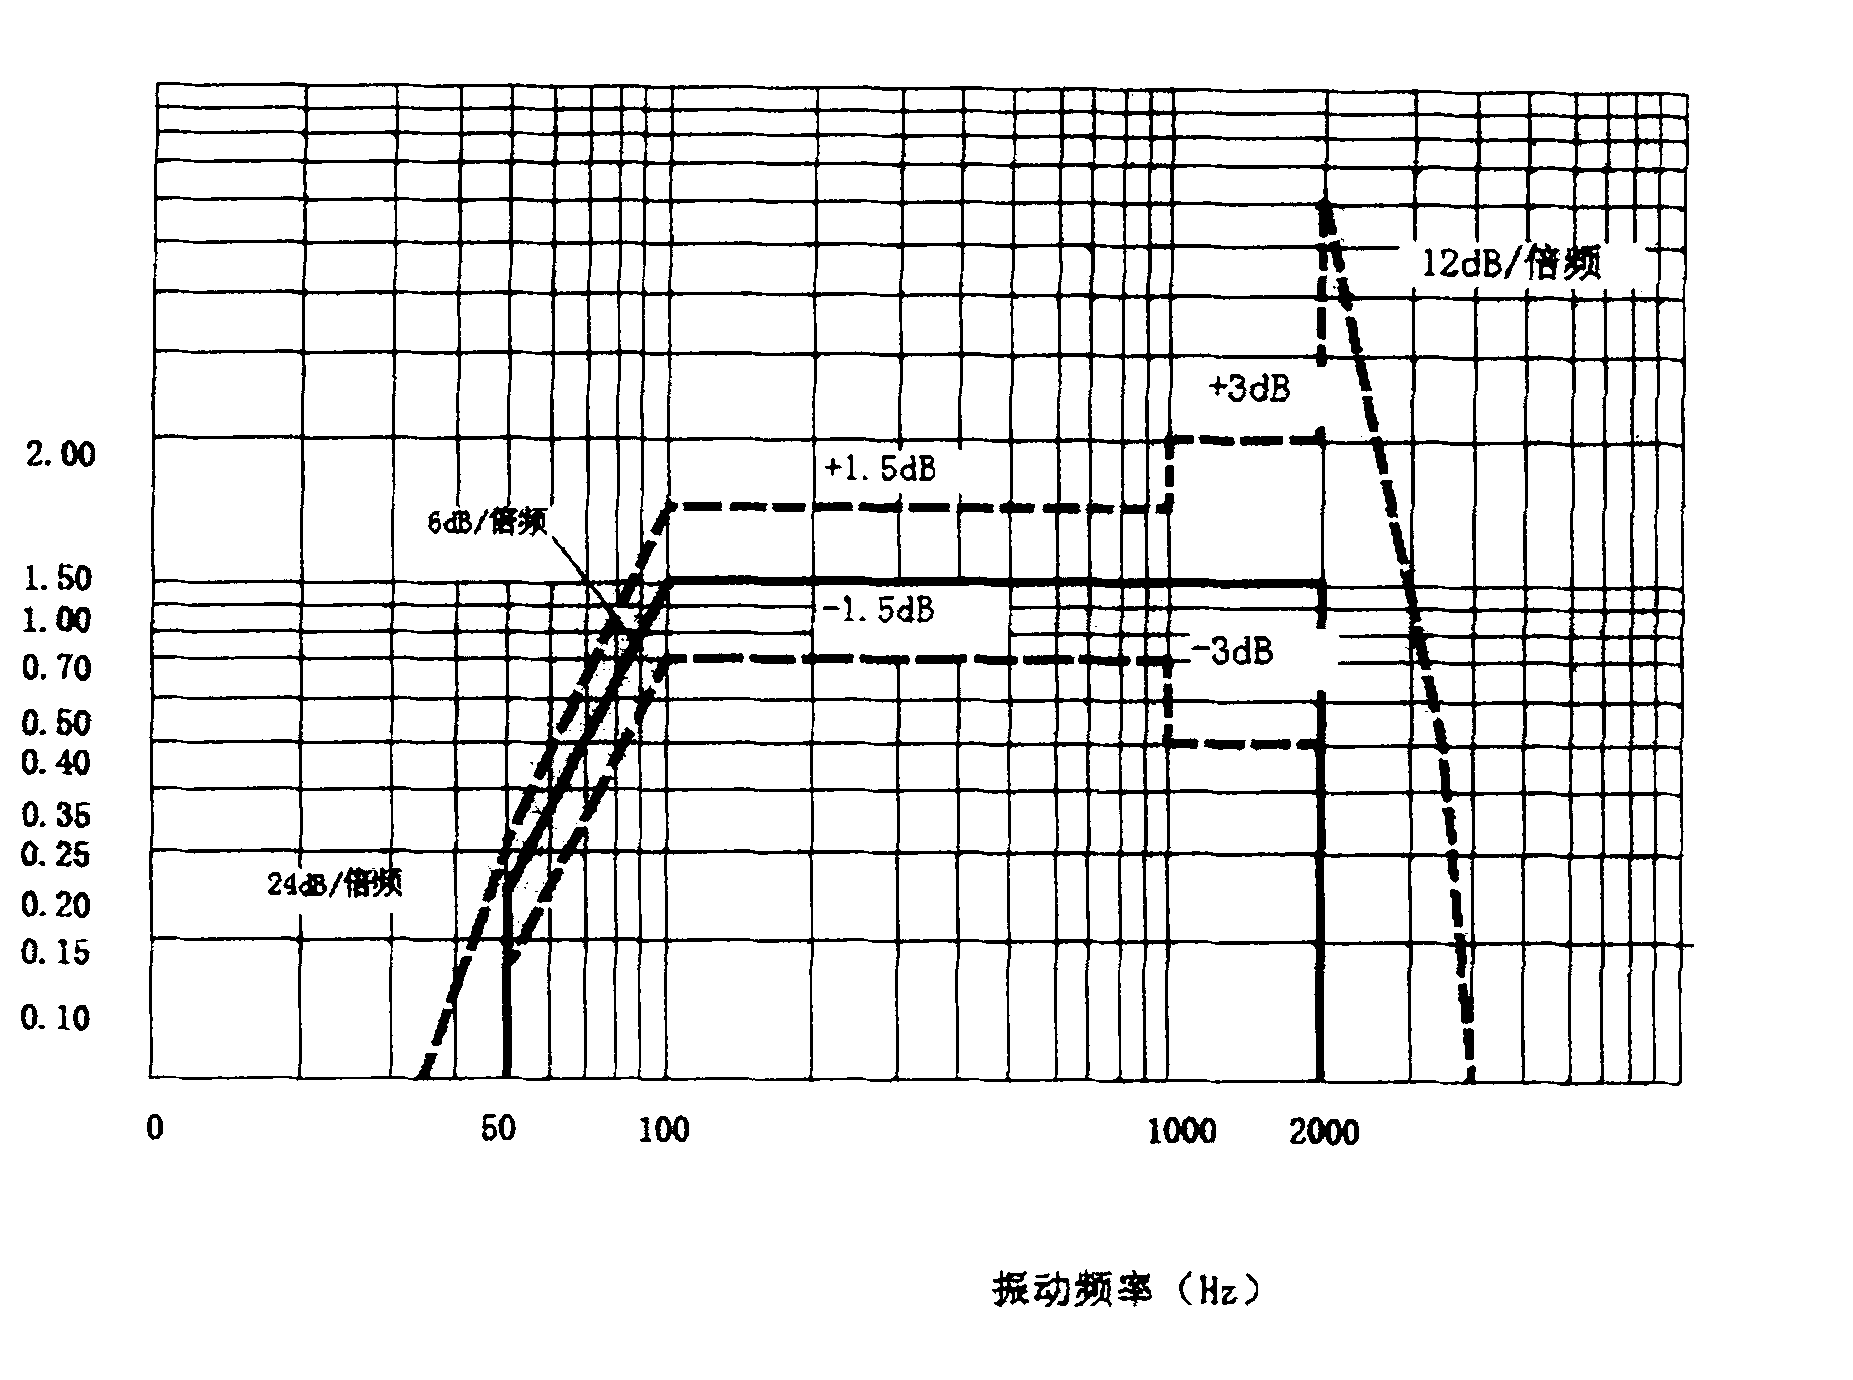 Combined environment test method for integrated circuit